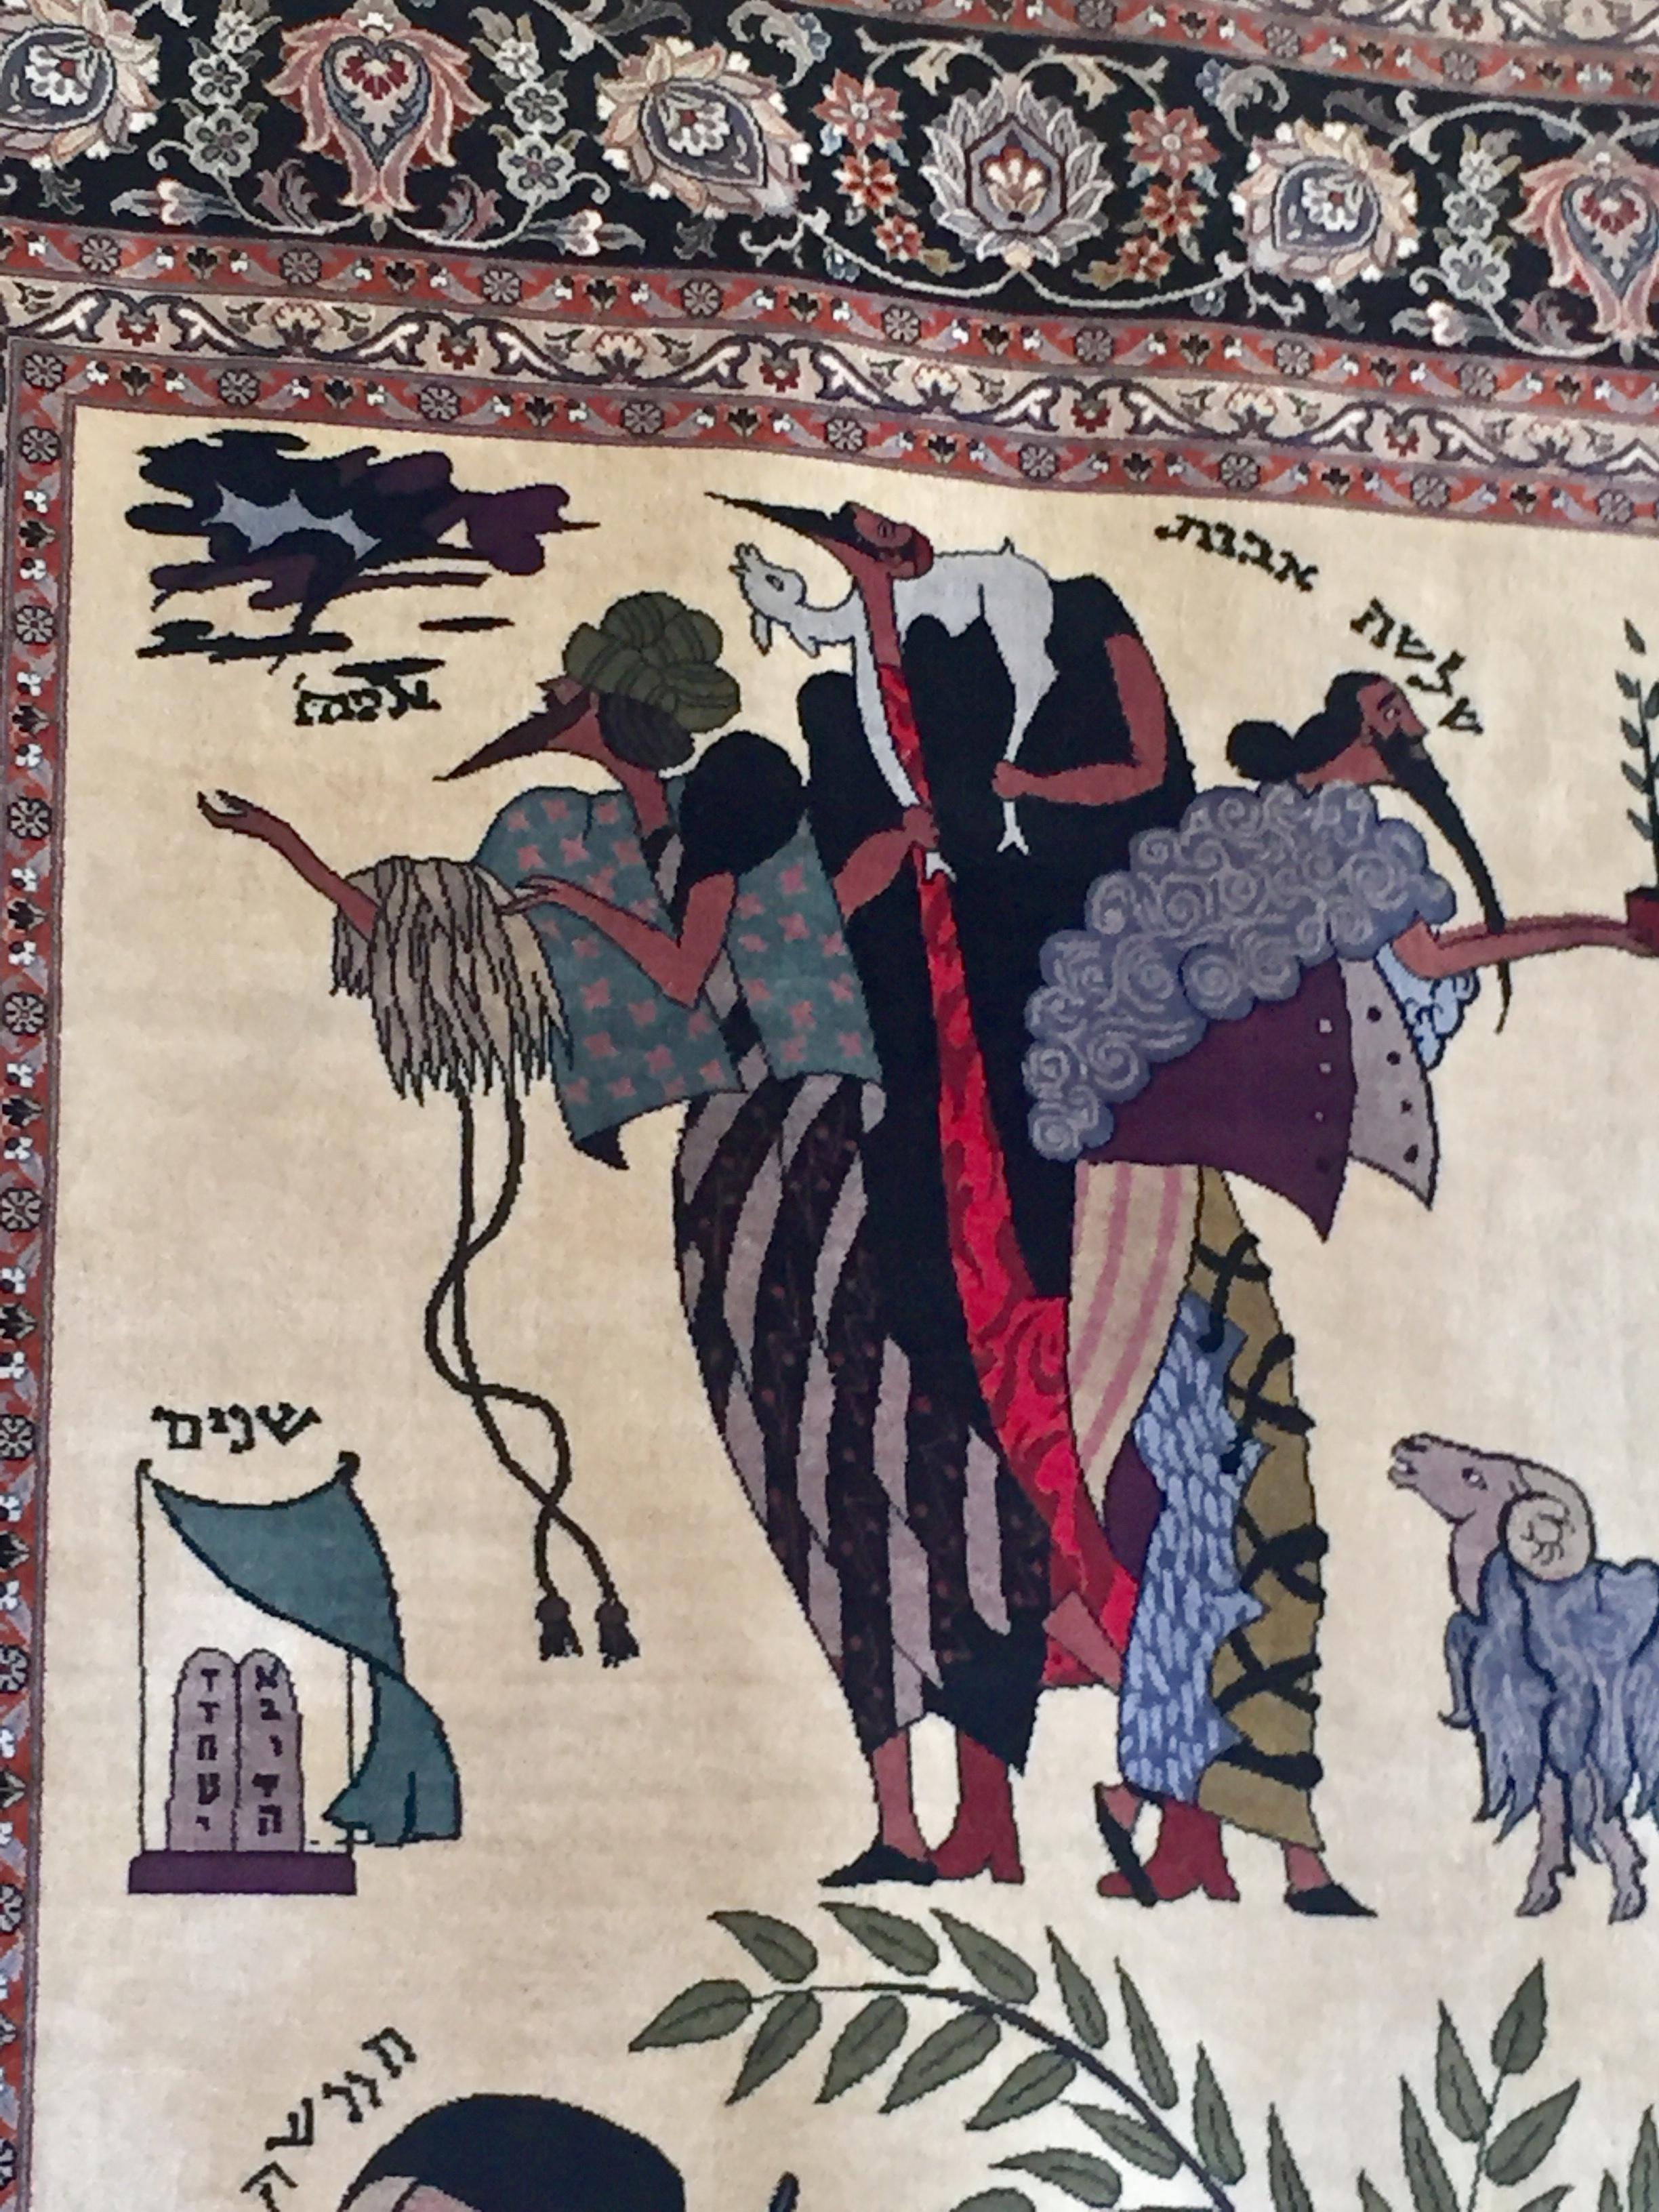 Artist: after Shlomo Katz, Polish/Israeli (1937 - 1992)
Title: Who Knows One (Passover)
Year: 2000
Medium: Woolen Carpet Tapestry, signature in the cache
Size: 120 x 95 in. (304.8 x 241.3 cm)